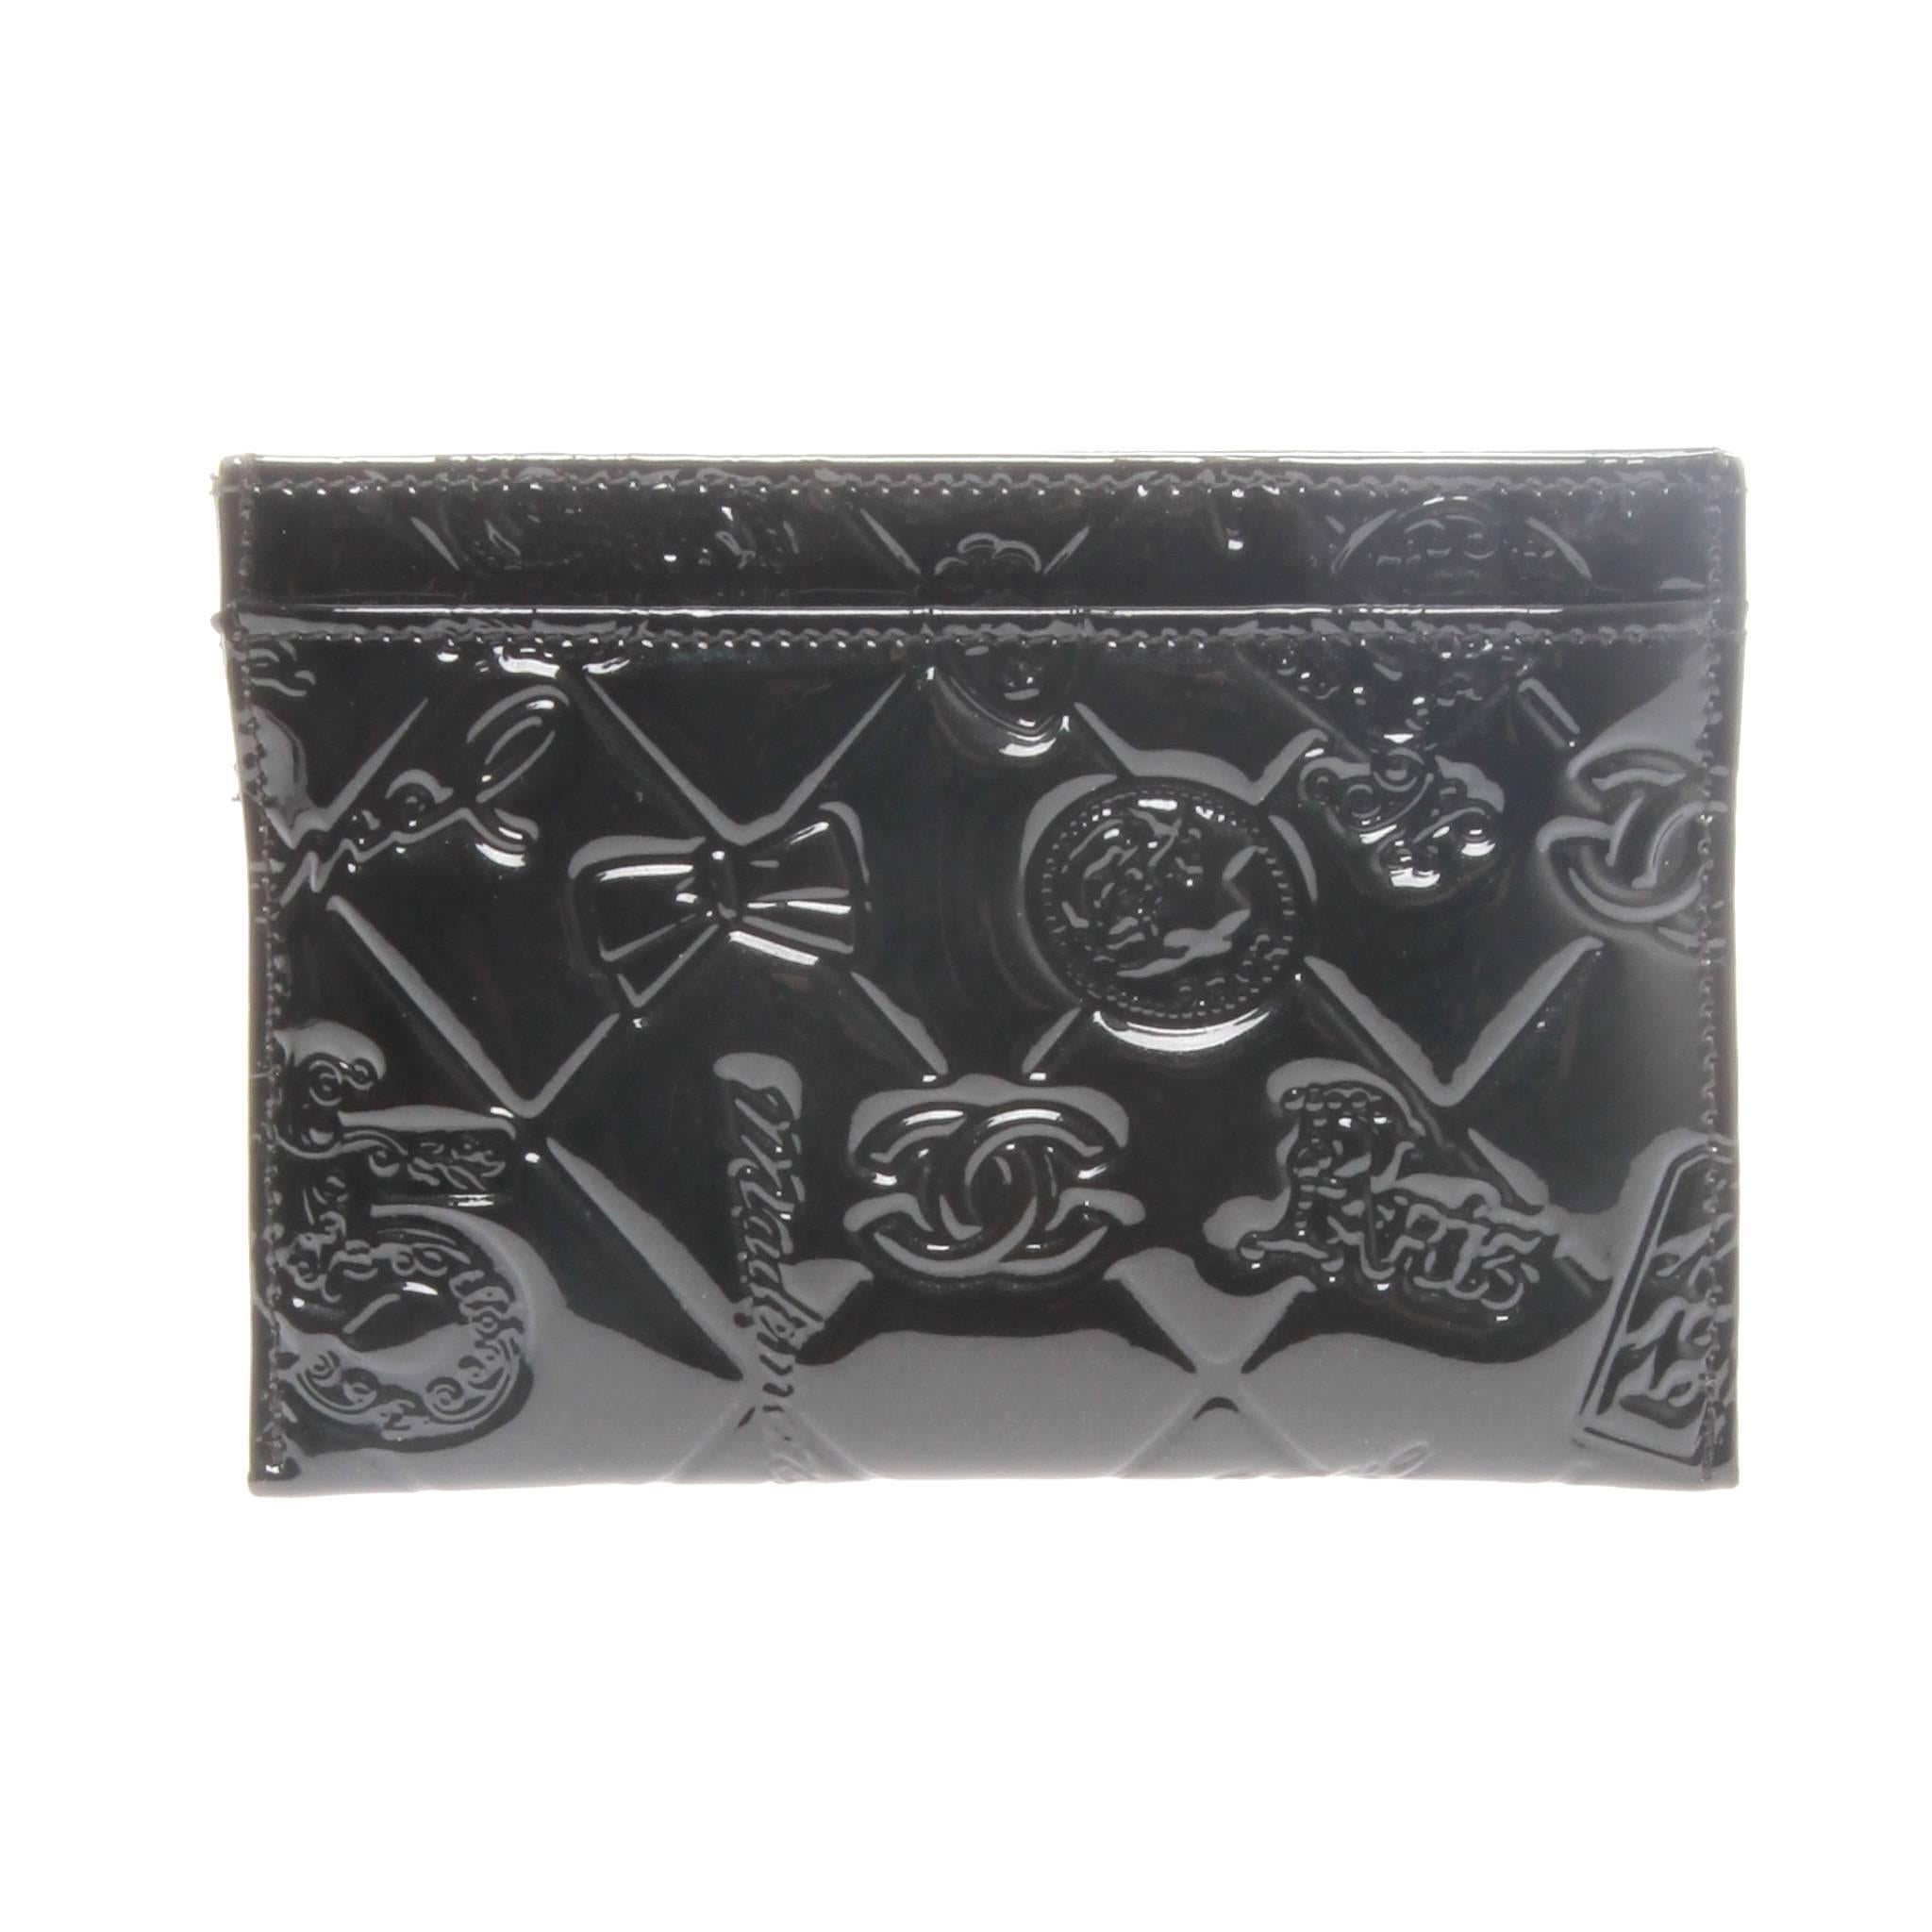 Chanel cardholder in black patent calfskin featuring an embossed lucky symbols quilted pattern featuring an array of iconic Chanel related icons.

Features two card slots to the front and a slot from receipts at back. 

Comes with authentic and